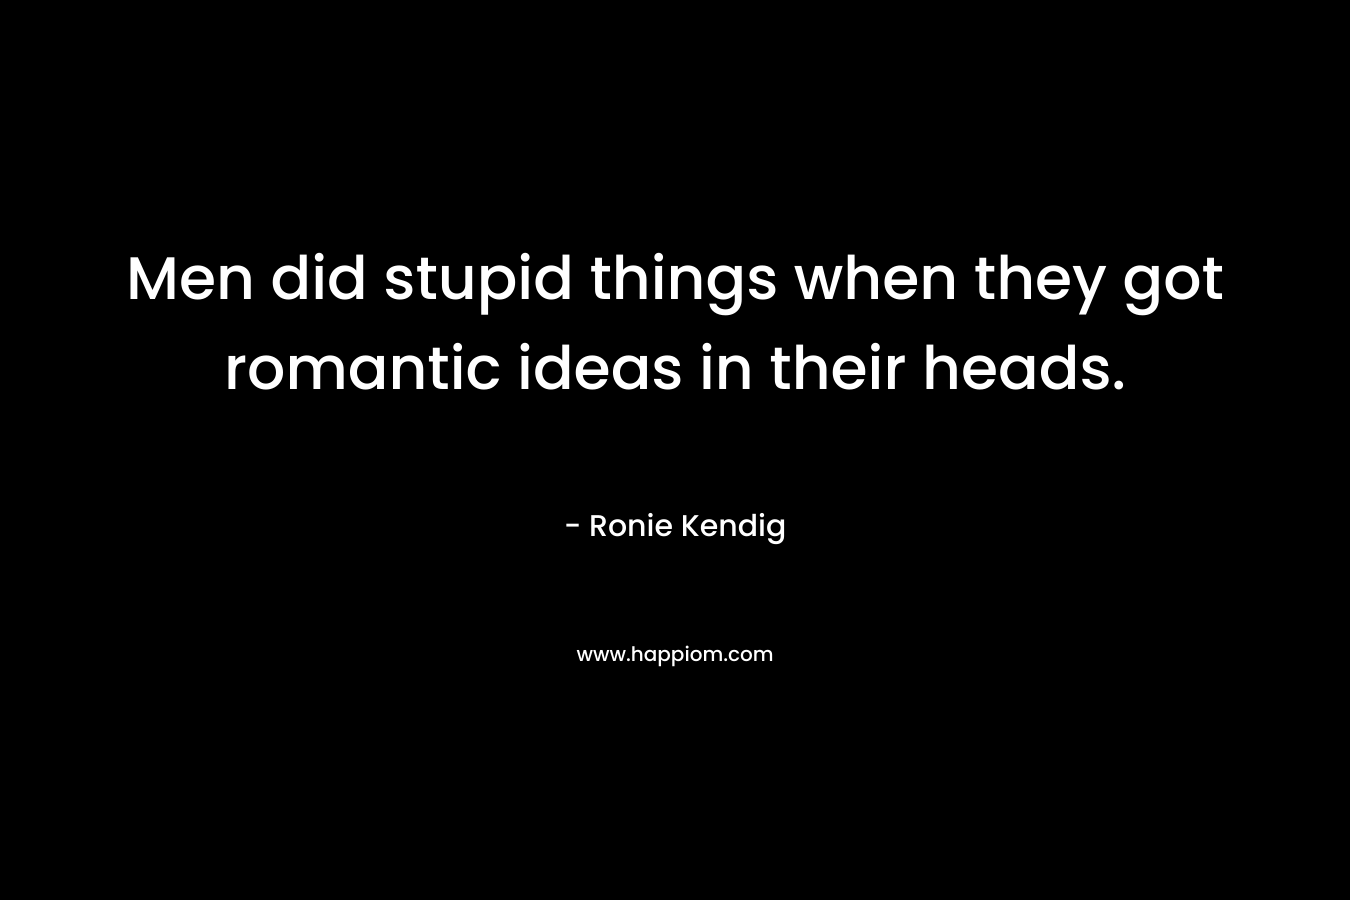 Men did stupid things when they got romantic ideas in their heads. – Ronie Kendig